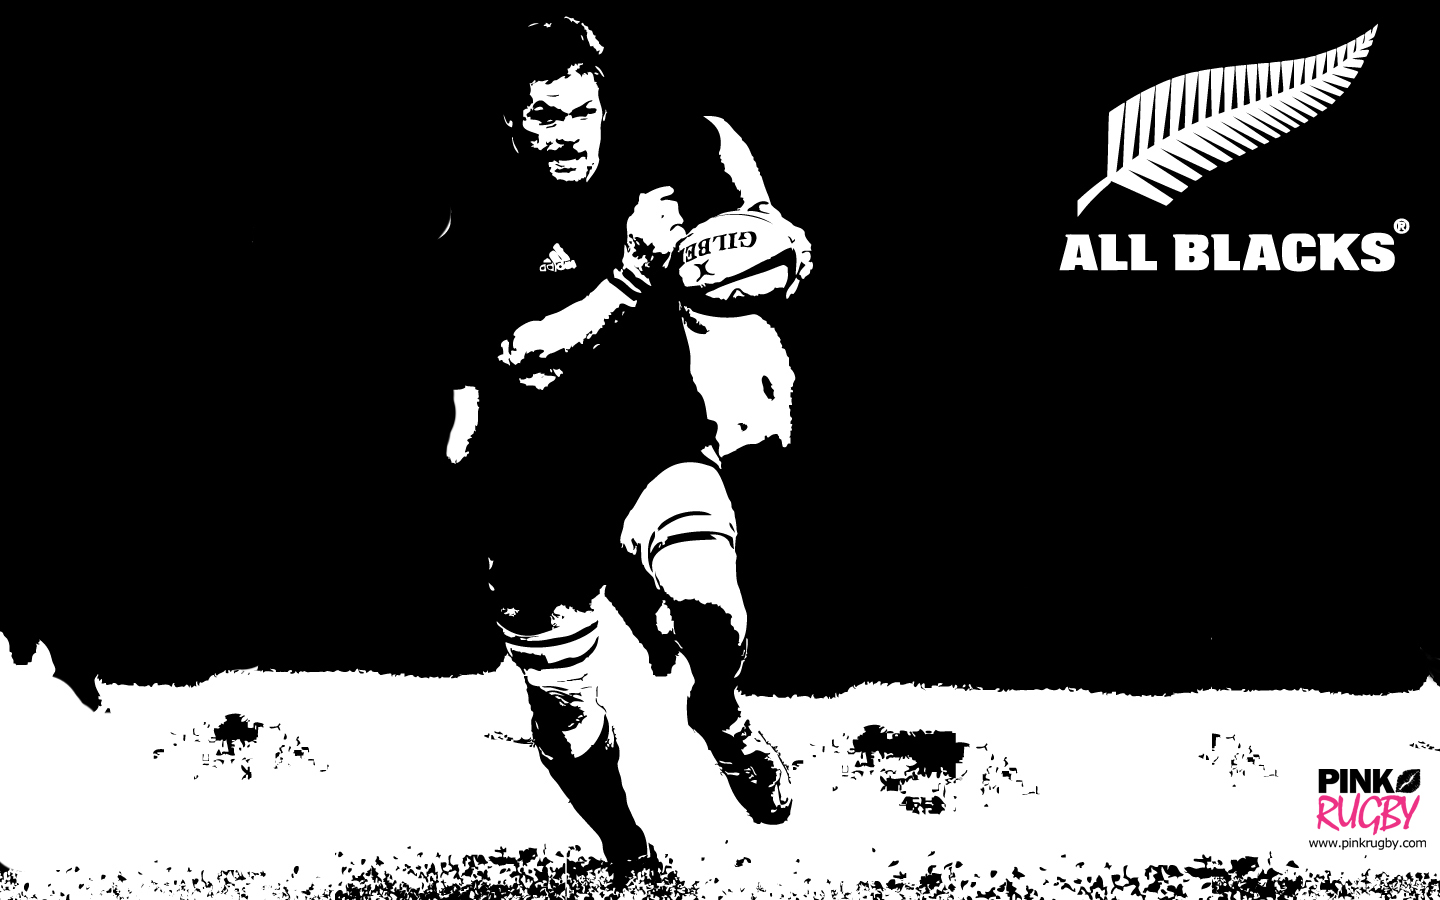 all black rugby wallpaper,black and white,illustration,stencil,graphic design,player